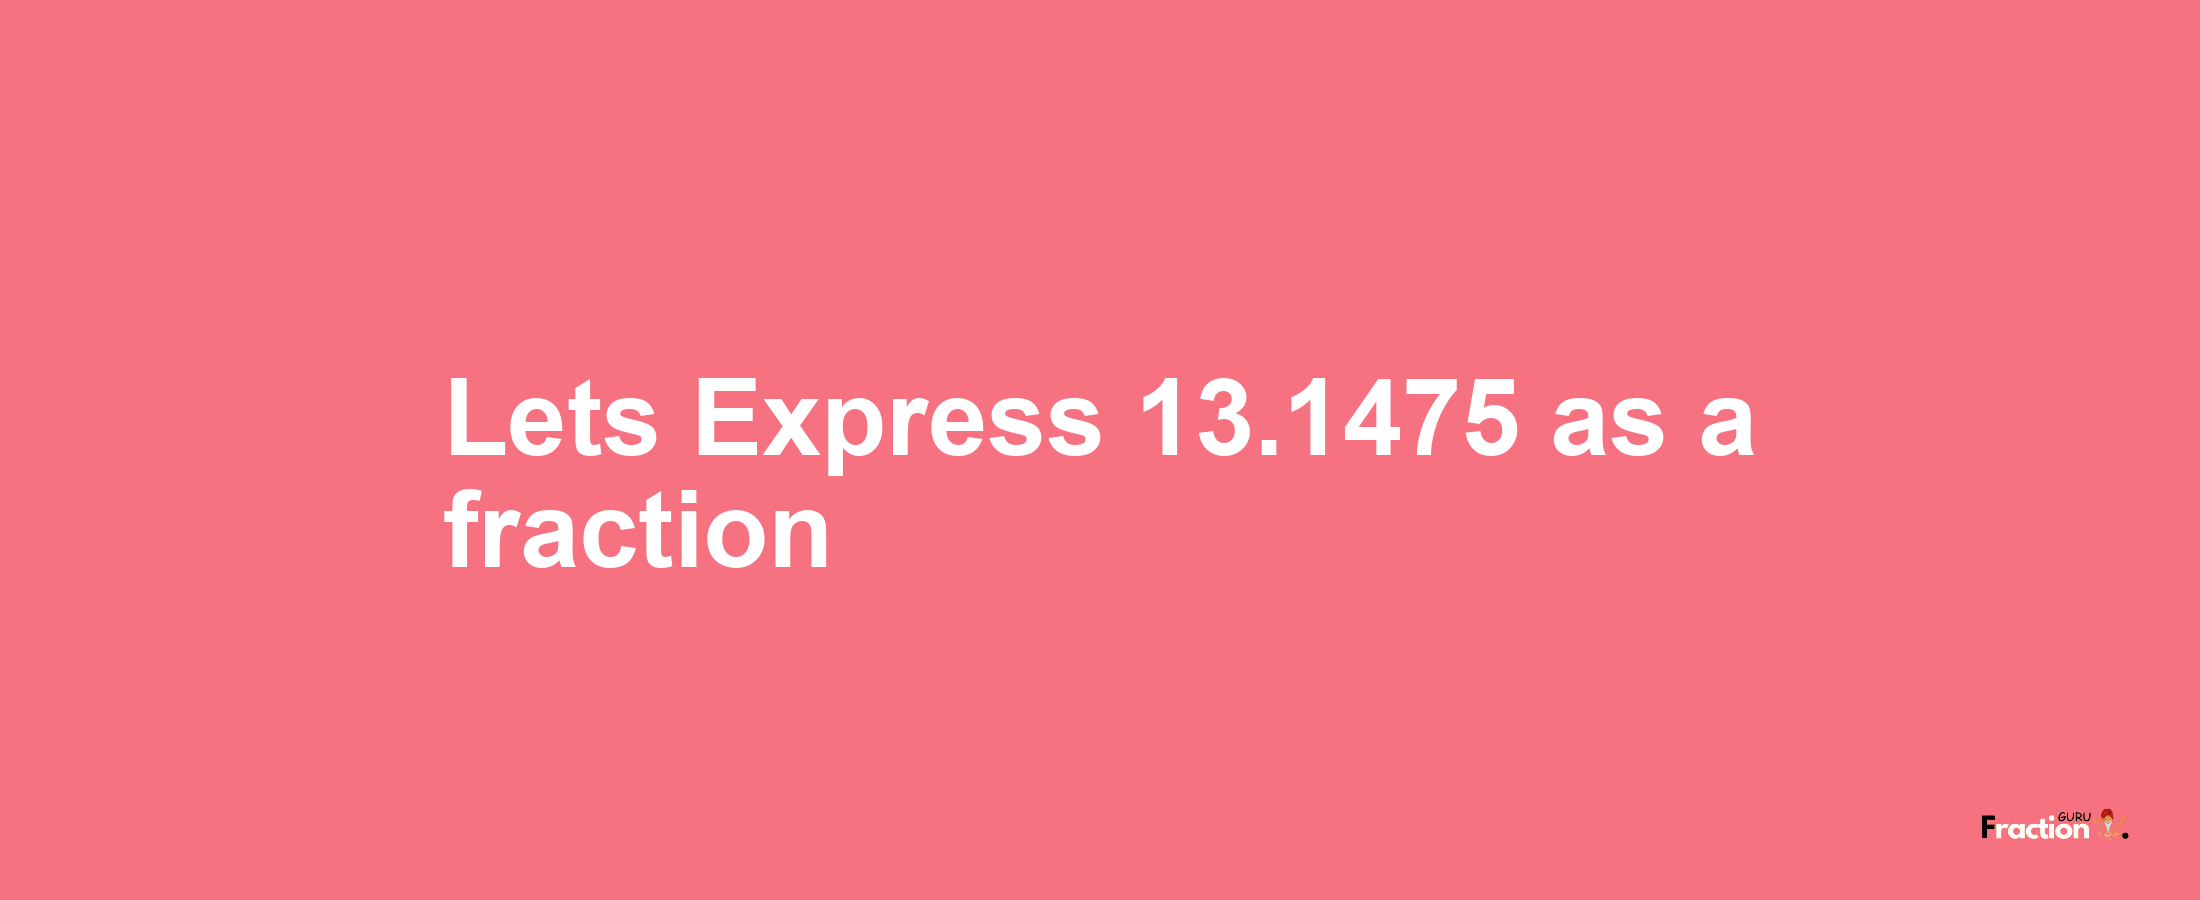 Lets Express 13.1475 as afraction